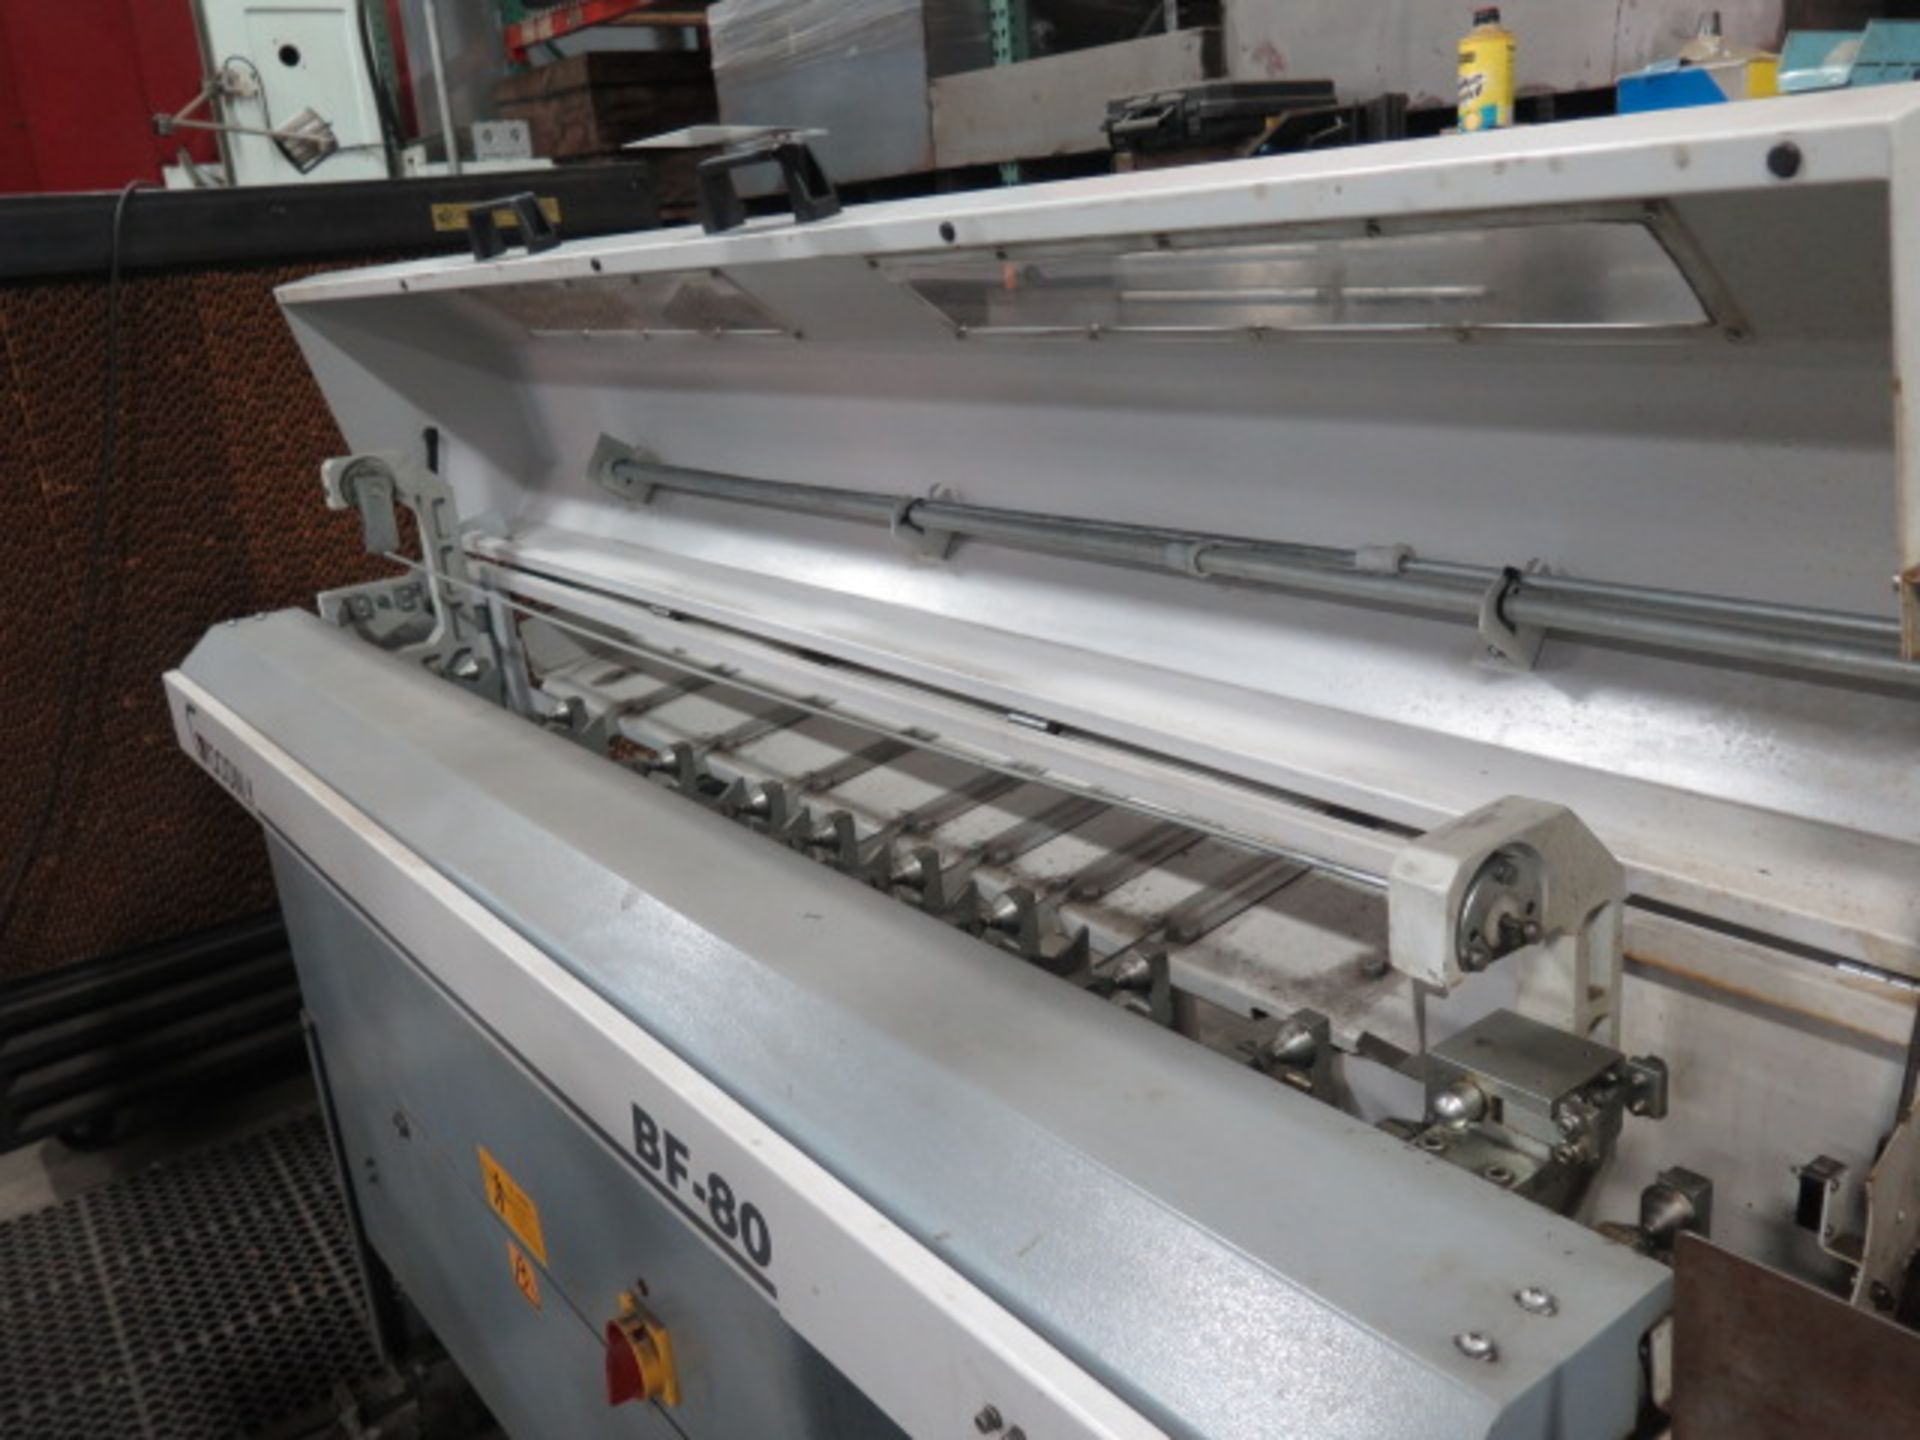 Goodway BF-80 Automatic Bar Loader/Feeder w/ PLC Controls (SOLD AS-IS - NO WARRANTY) - Image 4 of 10